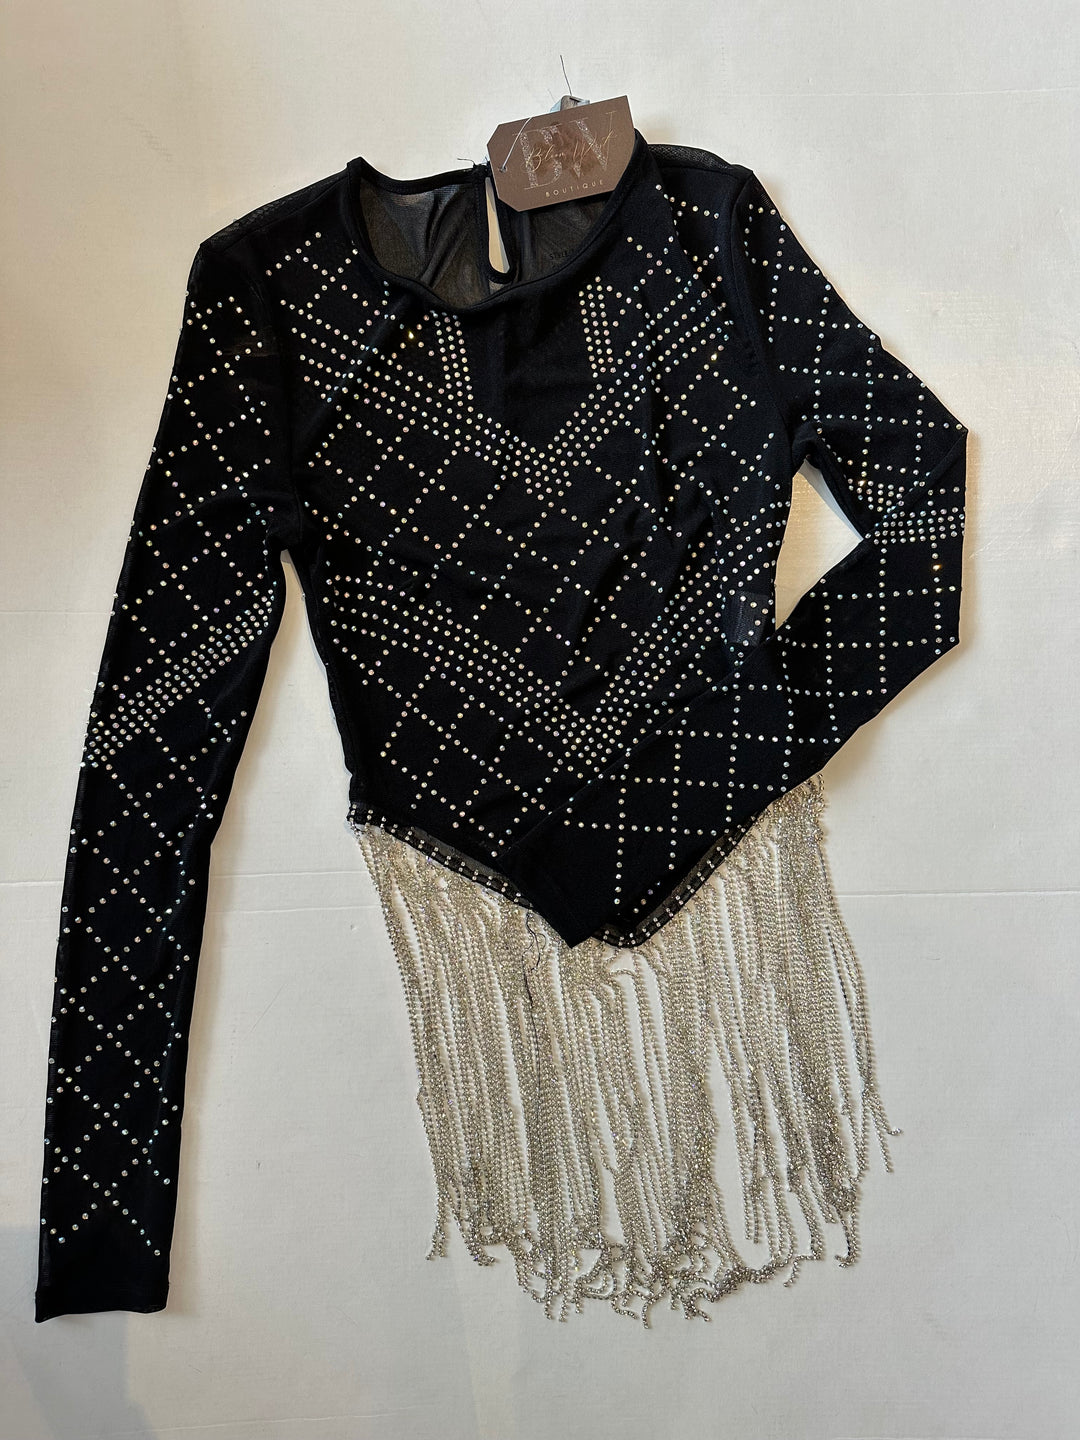 Jewel Stretch Mesh Studded Rhinestone Fringe Long Slv Top Black-Long Sleeves-Bloom West Boutique-Shop with Bloom West Boutique, Women's Fashion Boutique, Located in Houma, Louisiana